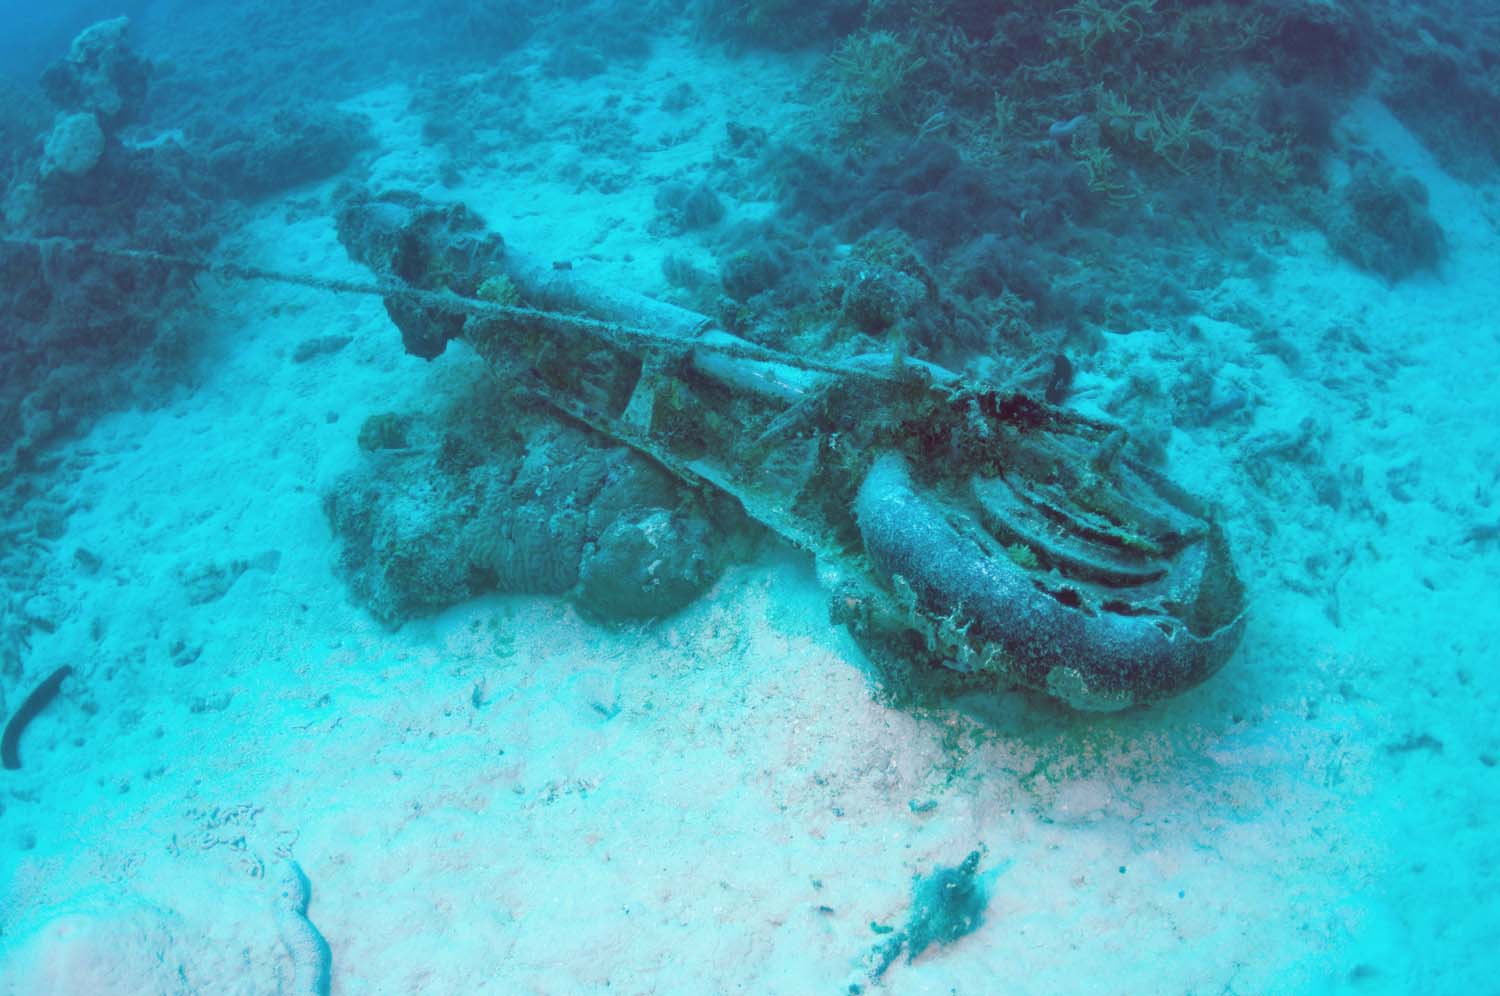 One of landing gear struts lies at close proximity to the aircraft wreck